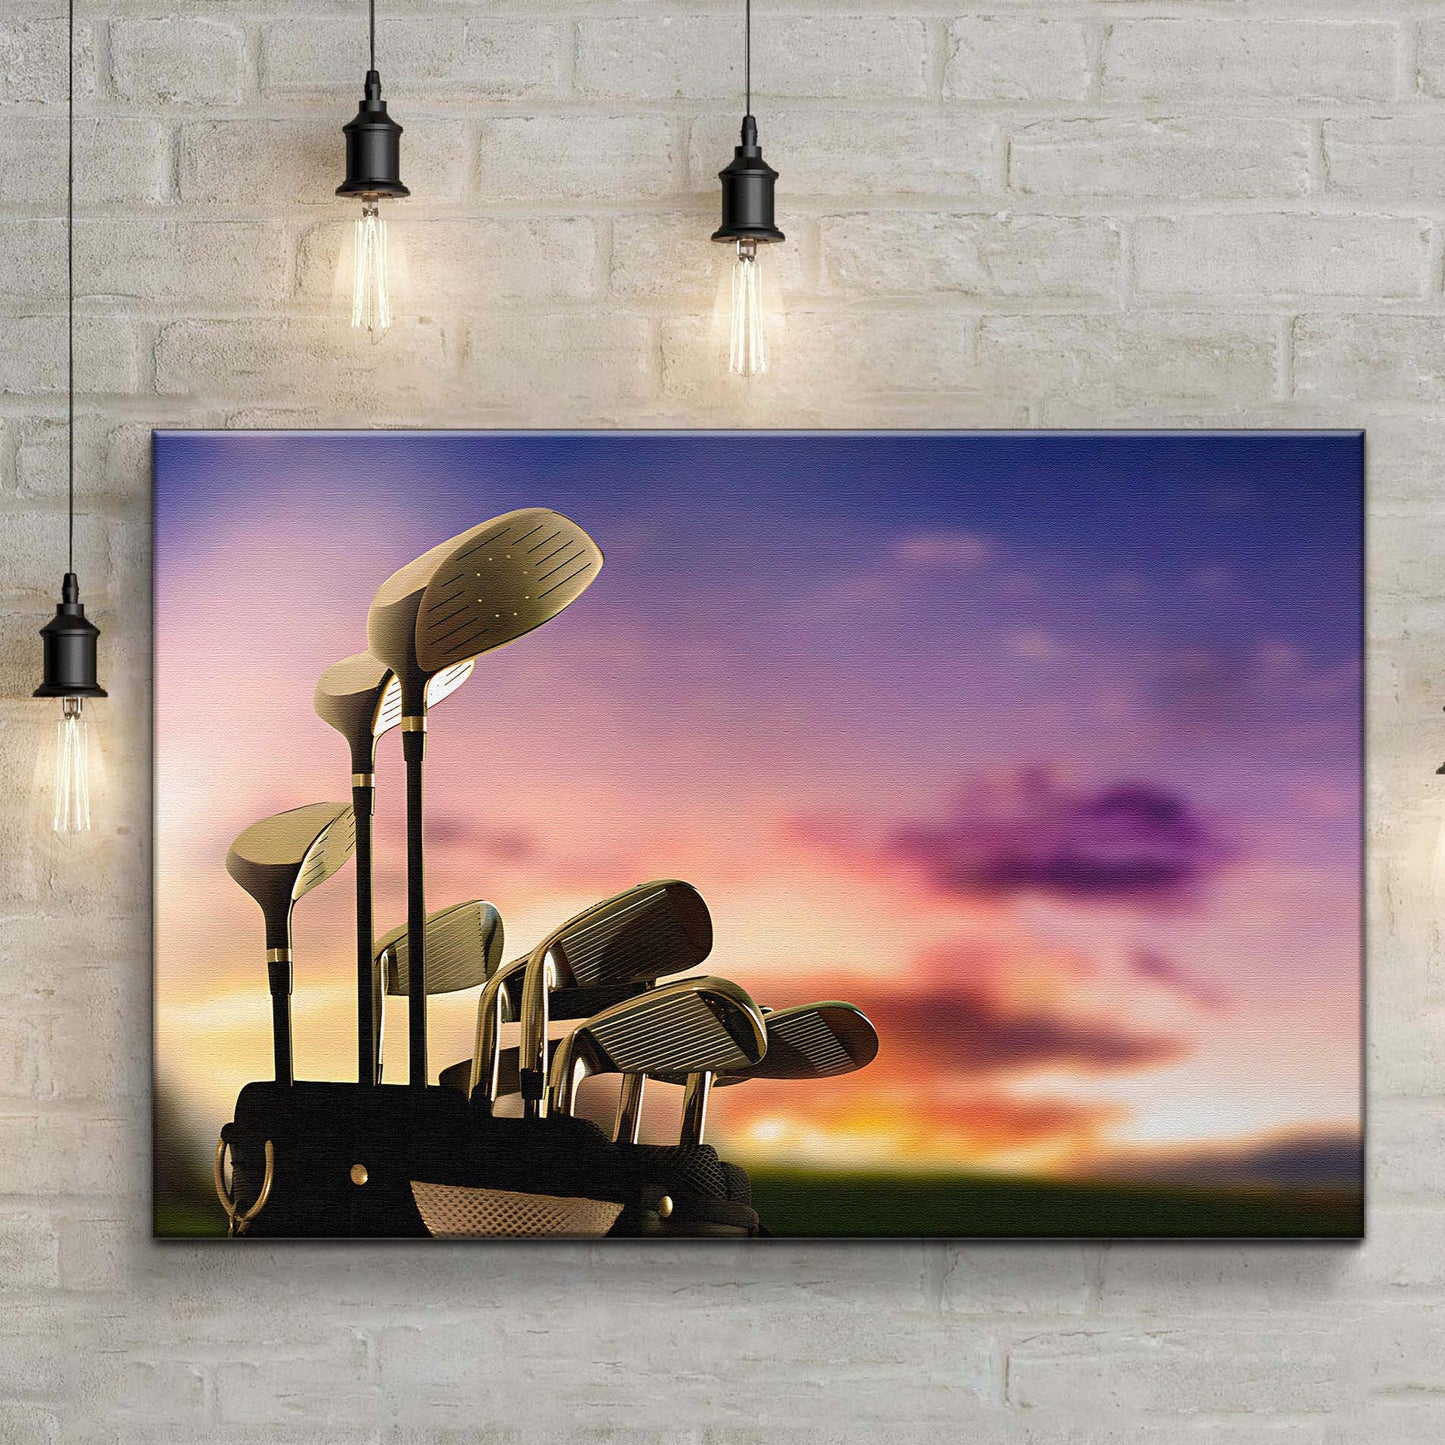 Golf Club Collection Canvas Wall Art Style 2 - Image by Tailored Canvases